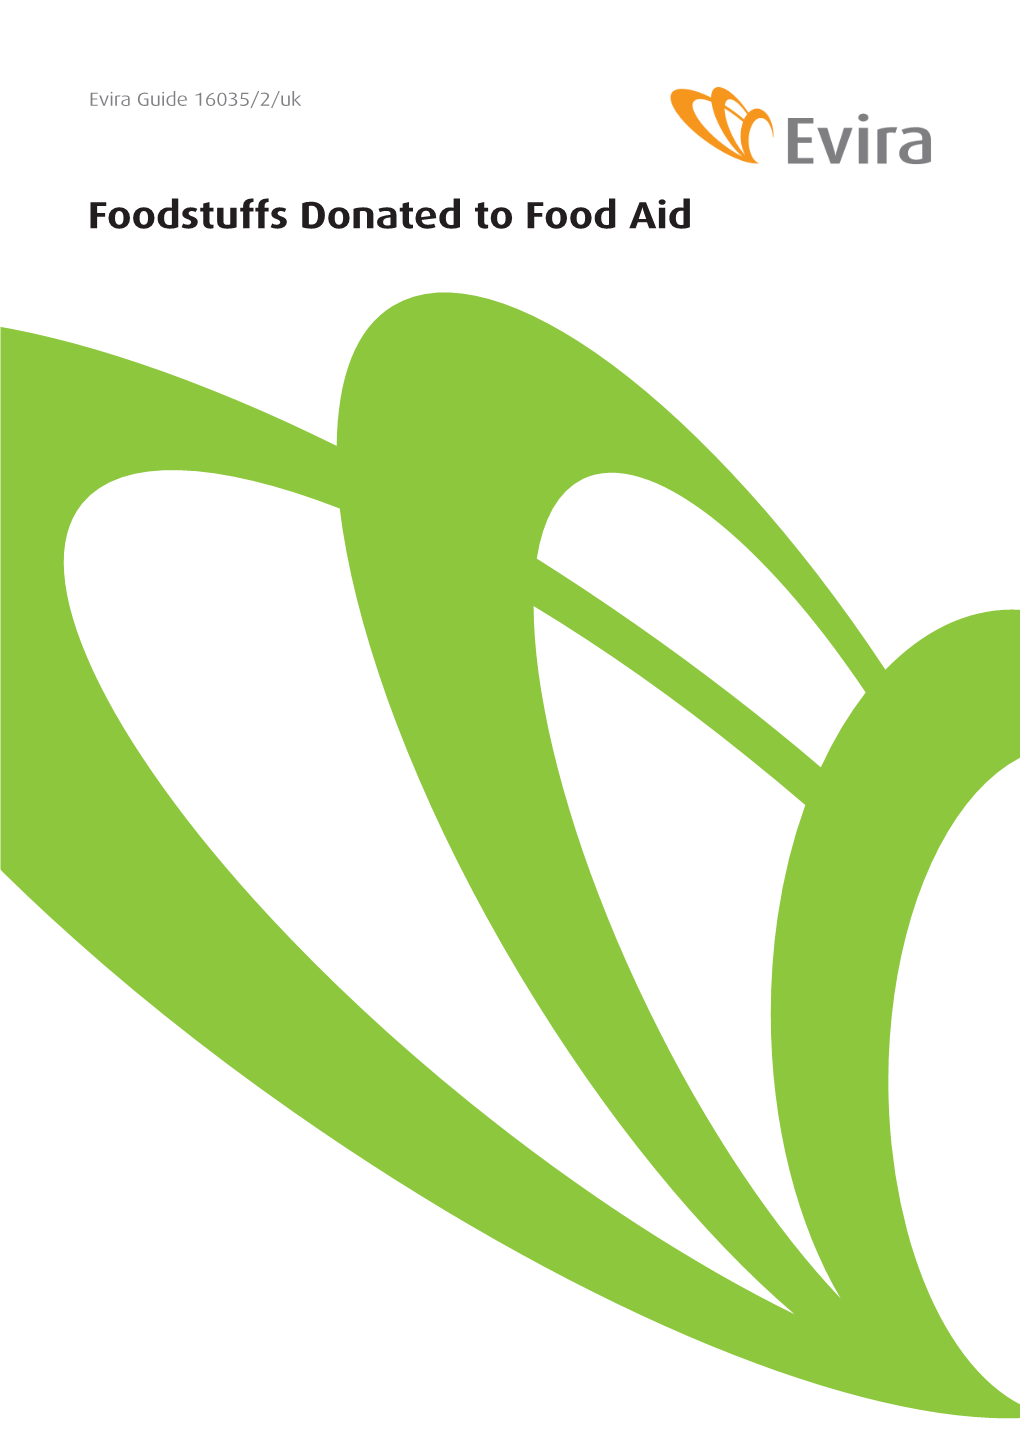 Foodstuffs Donated to Food Aid Page/Pages 1 / 9 Instructions / Version 16035/2 Introduced on 1.7.2017